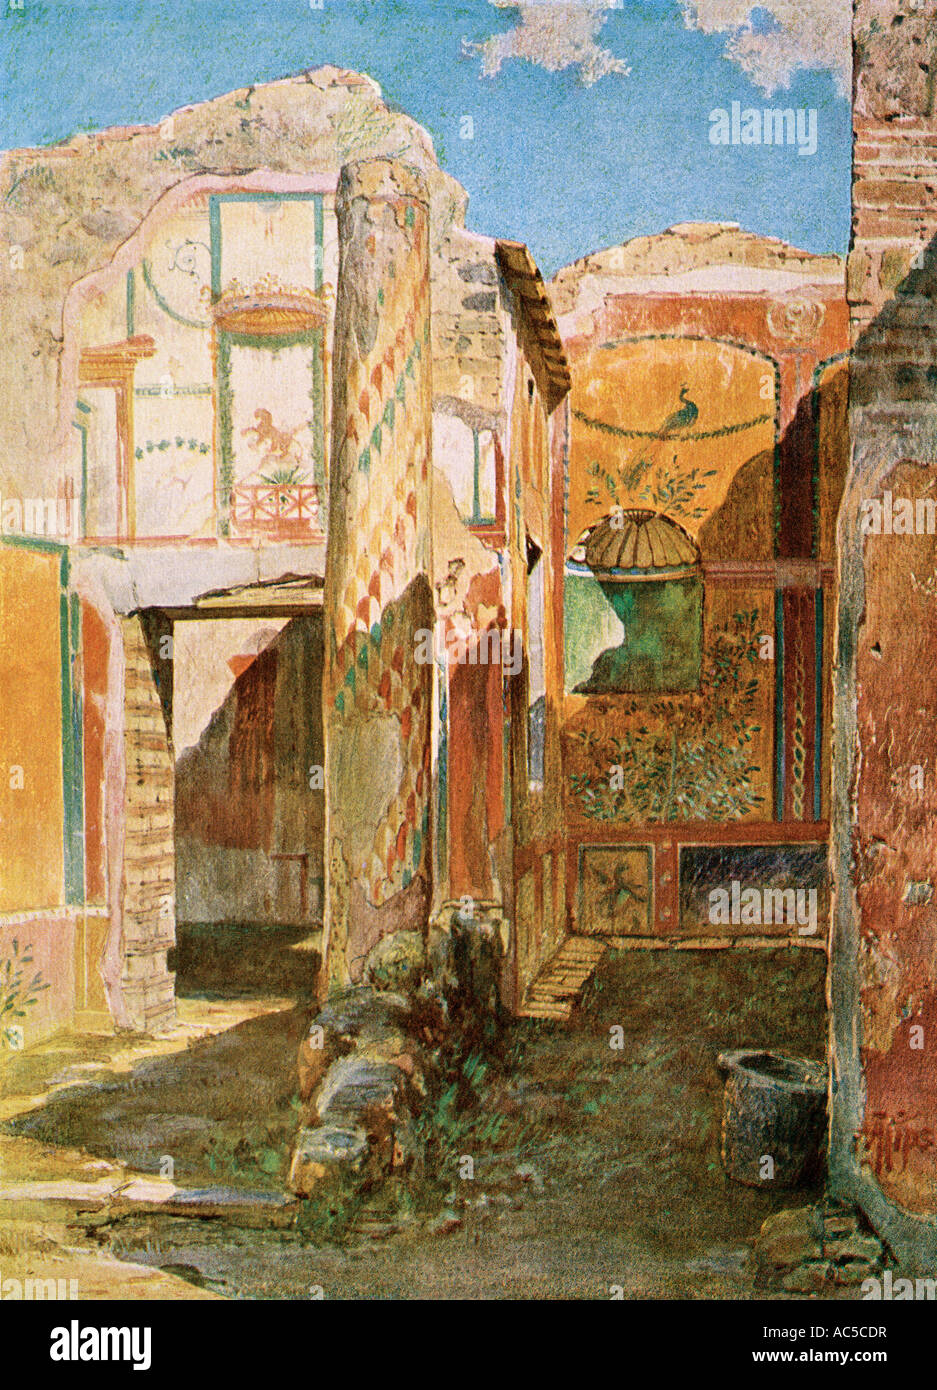 Remains of a home interior in Pompeii from the Roman Empire period buried in the eruption of Mount Vesuvius. Color lithograph Stock Photo